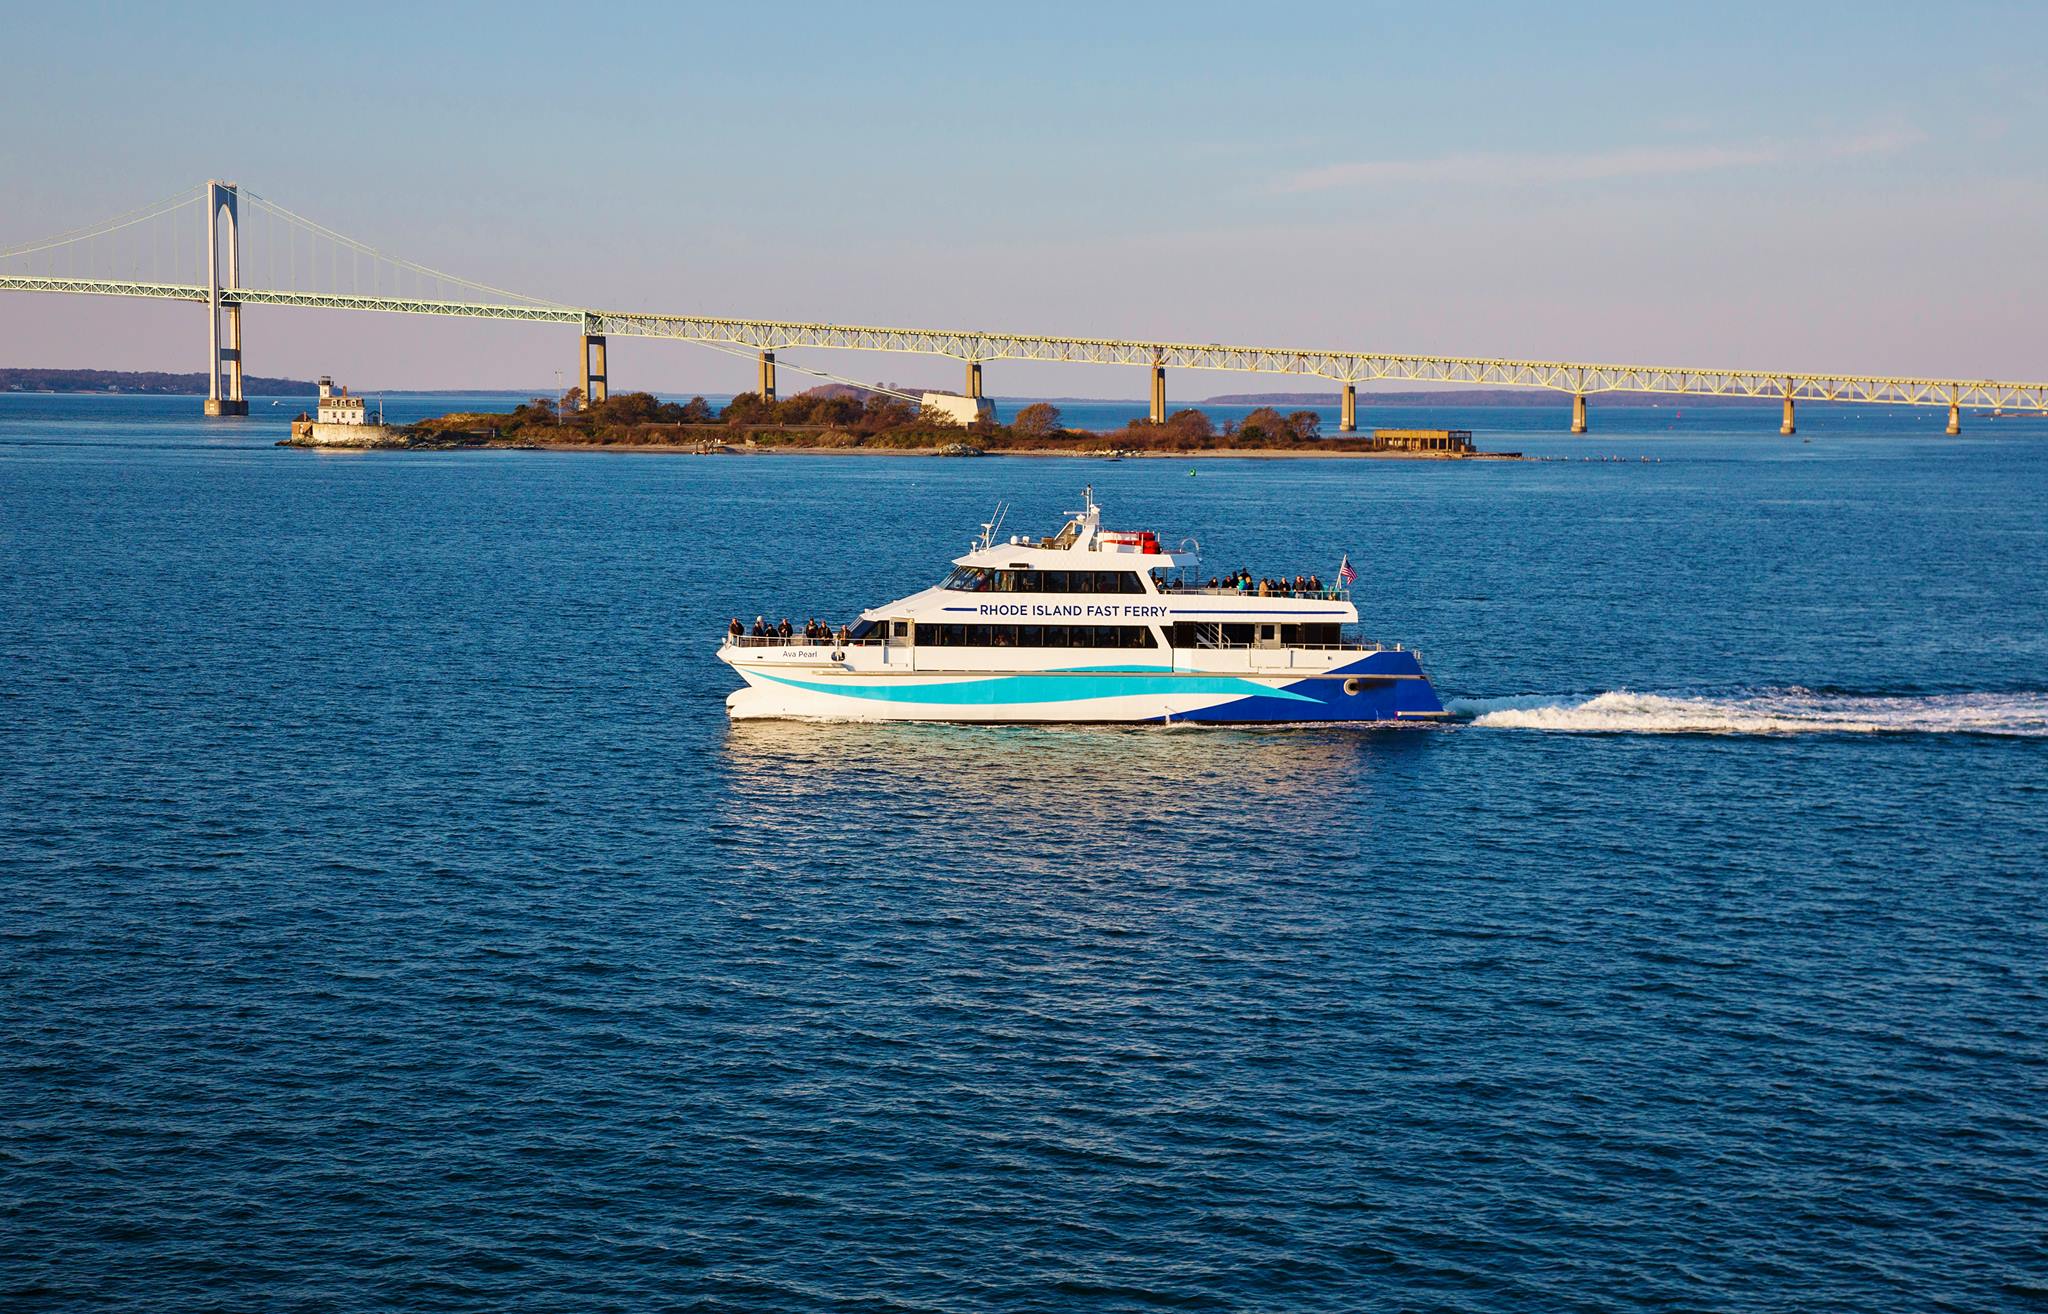 Rhode Island fast ferry sailing tourists to lighthouses - an activity included in the Rhode Island Lighthouse Cruise.